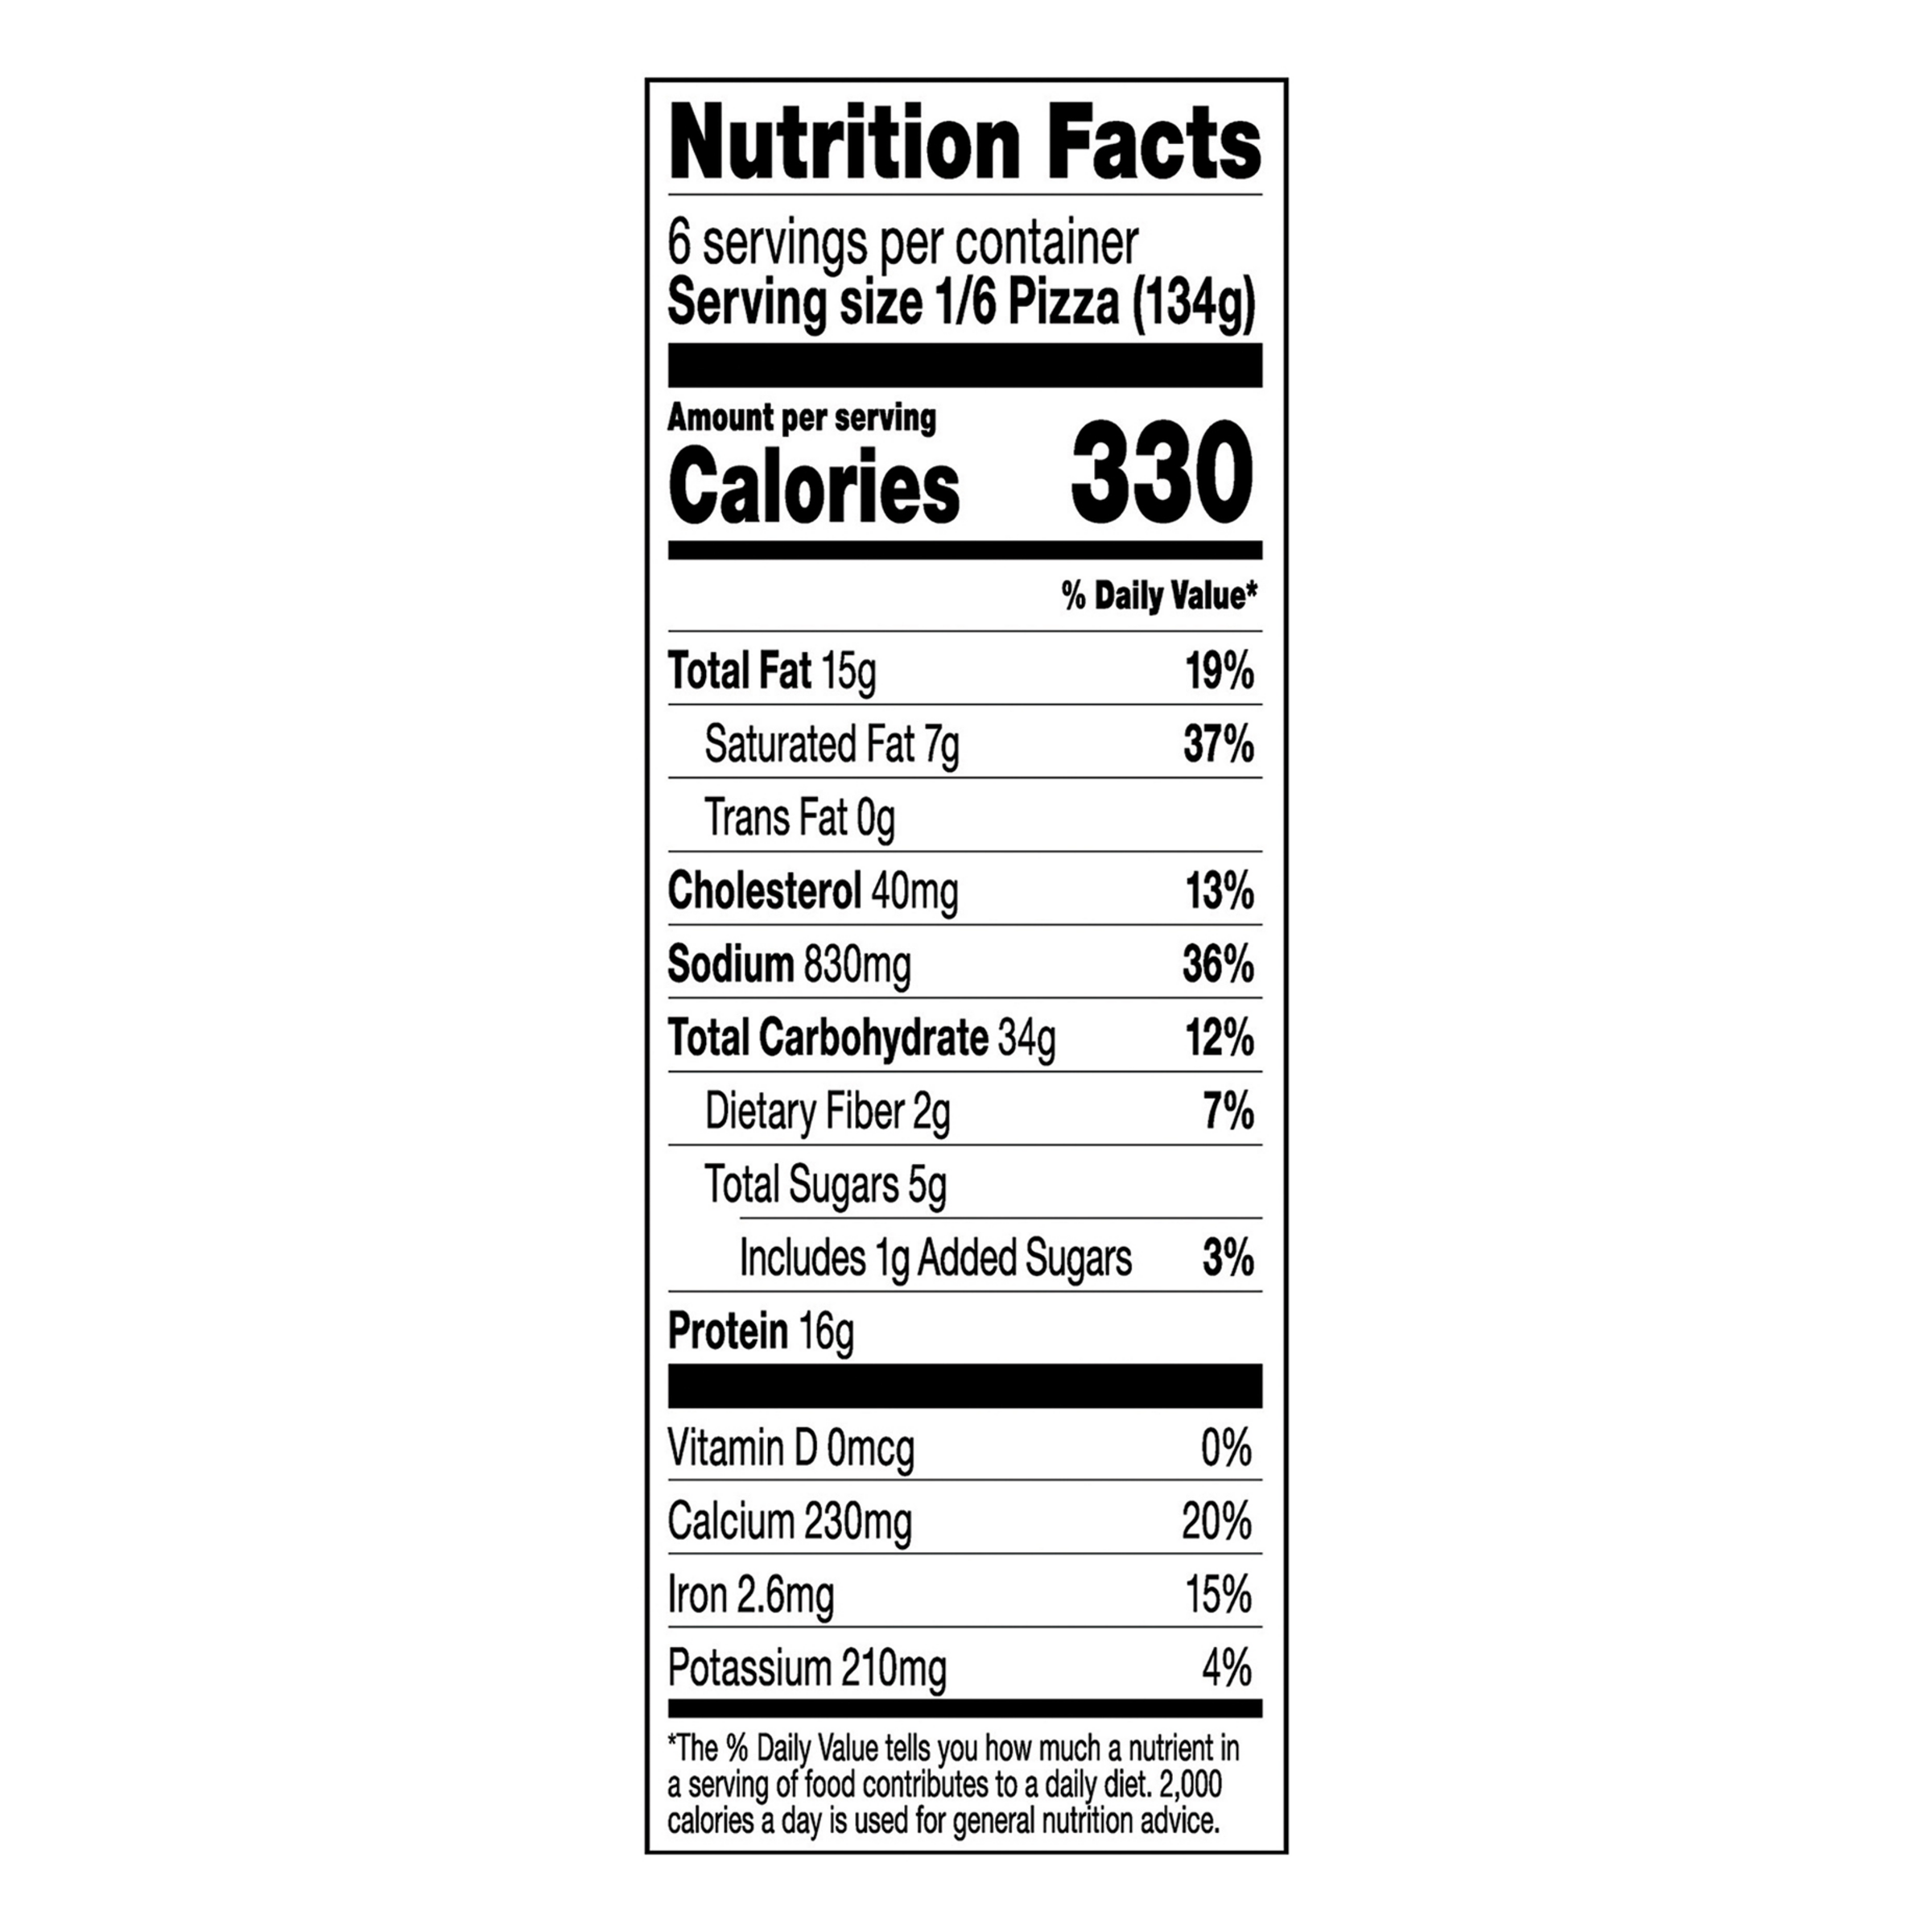 Nutrition Facts 6 servings per container Serving size 1/6 Pizza (132g) Amount per serving Calories 390 % Daily Value* Total Fat 19g 25% Saturated Fat 9g 45% Trans Fat 0g Cholesterol 35mg 11% Sodium 680mg 30% Total Carbohydrate 38g 14% Dietary Fiber 2g 7% Total Sugars 7g Includes 1g Added Sugars 3% Protein 15g 23% Vitamin D 0mcg 0% Calcium 220mg 15% Iron 1.4mg 8% Potassium 480mg 10% *The % Daily Value tells you how much a nutrient in a serving of food contributes to a daily diet. 2,000 calories a day is used for general nutrition advice.